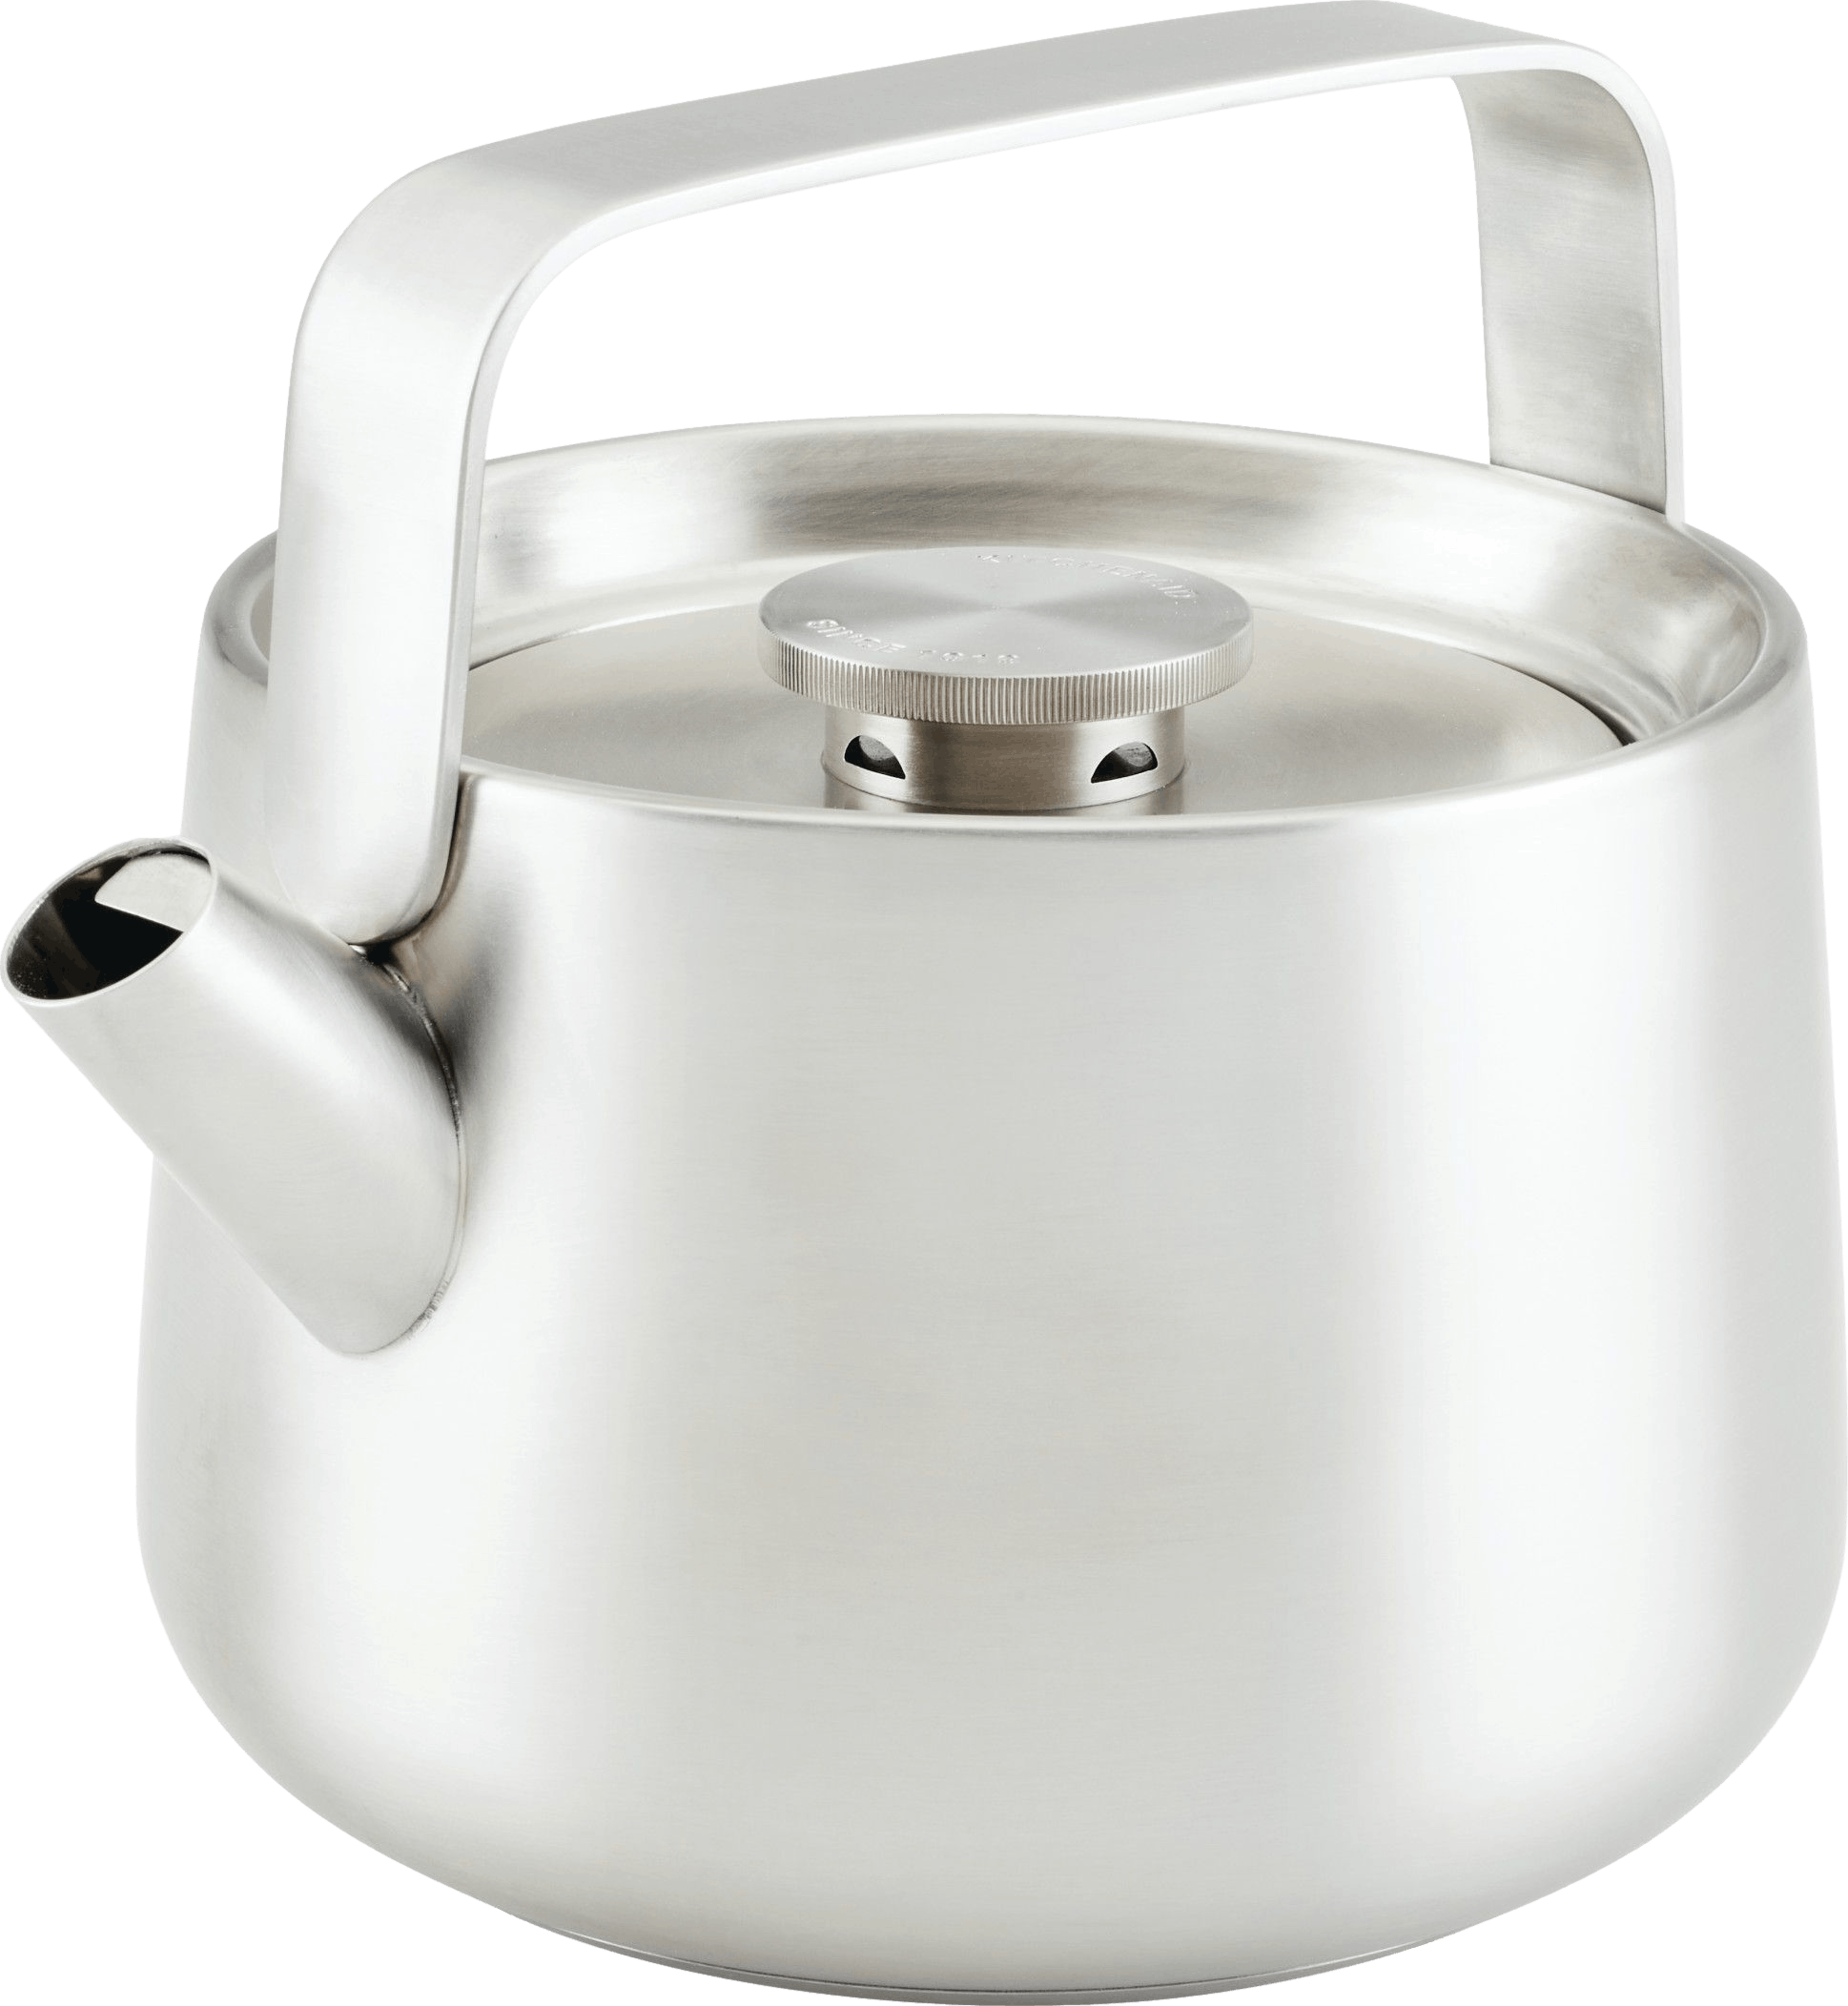 KitchenAid Stainless Steel Whistling Induction Teakettle, 1.9-Quart, Brushed Stainless Steel